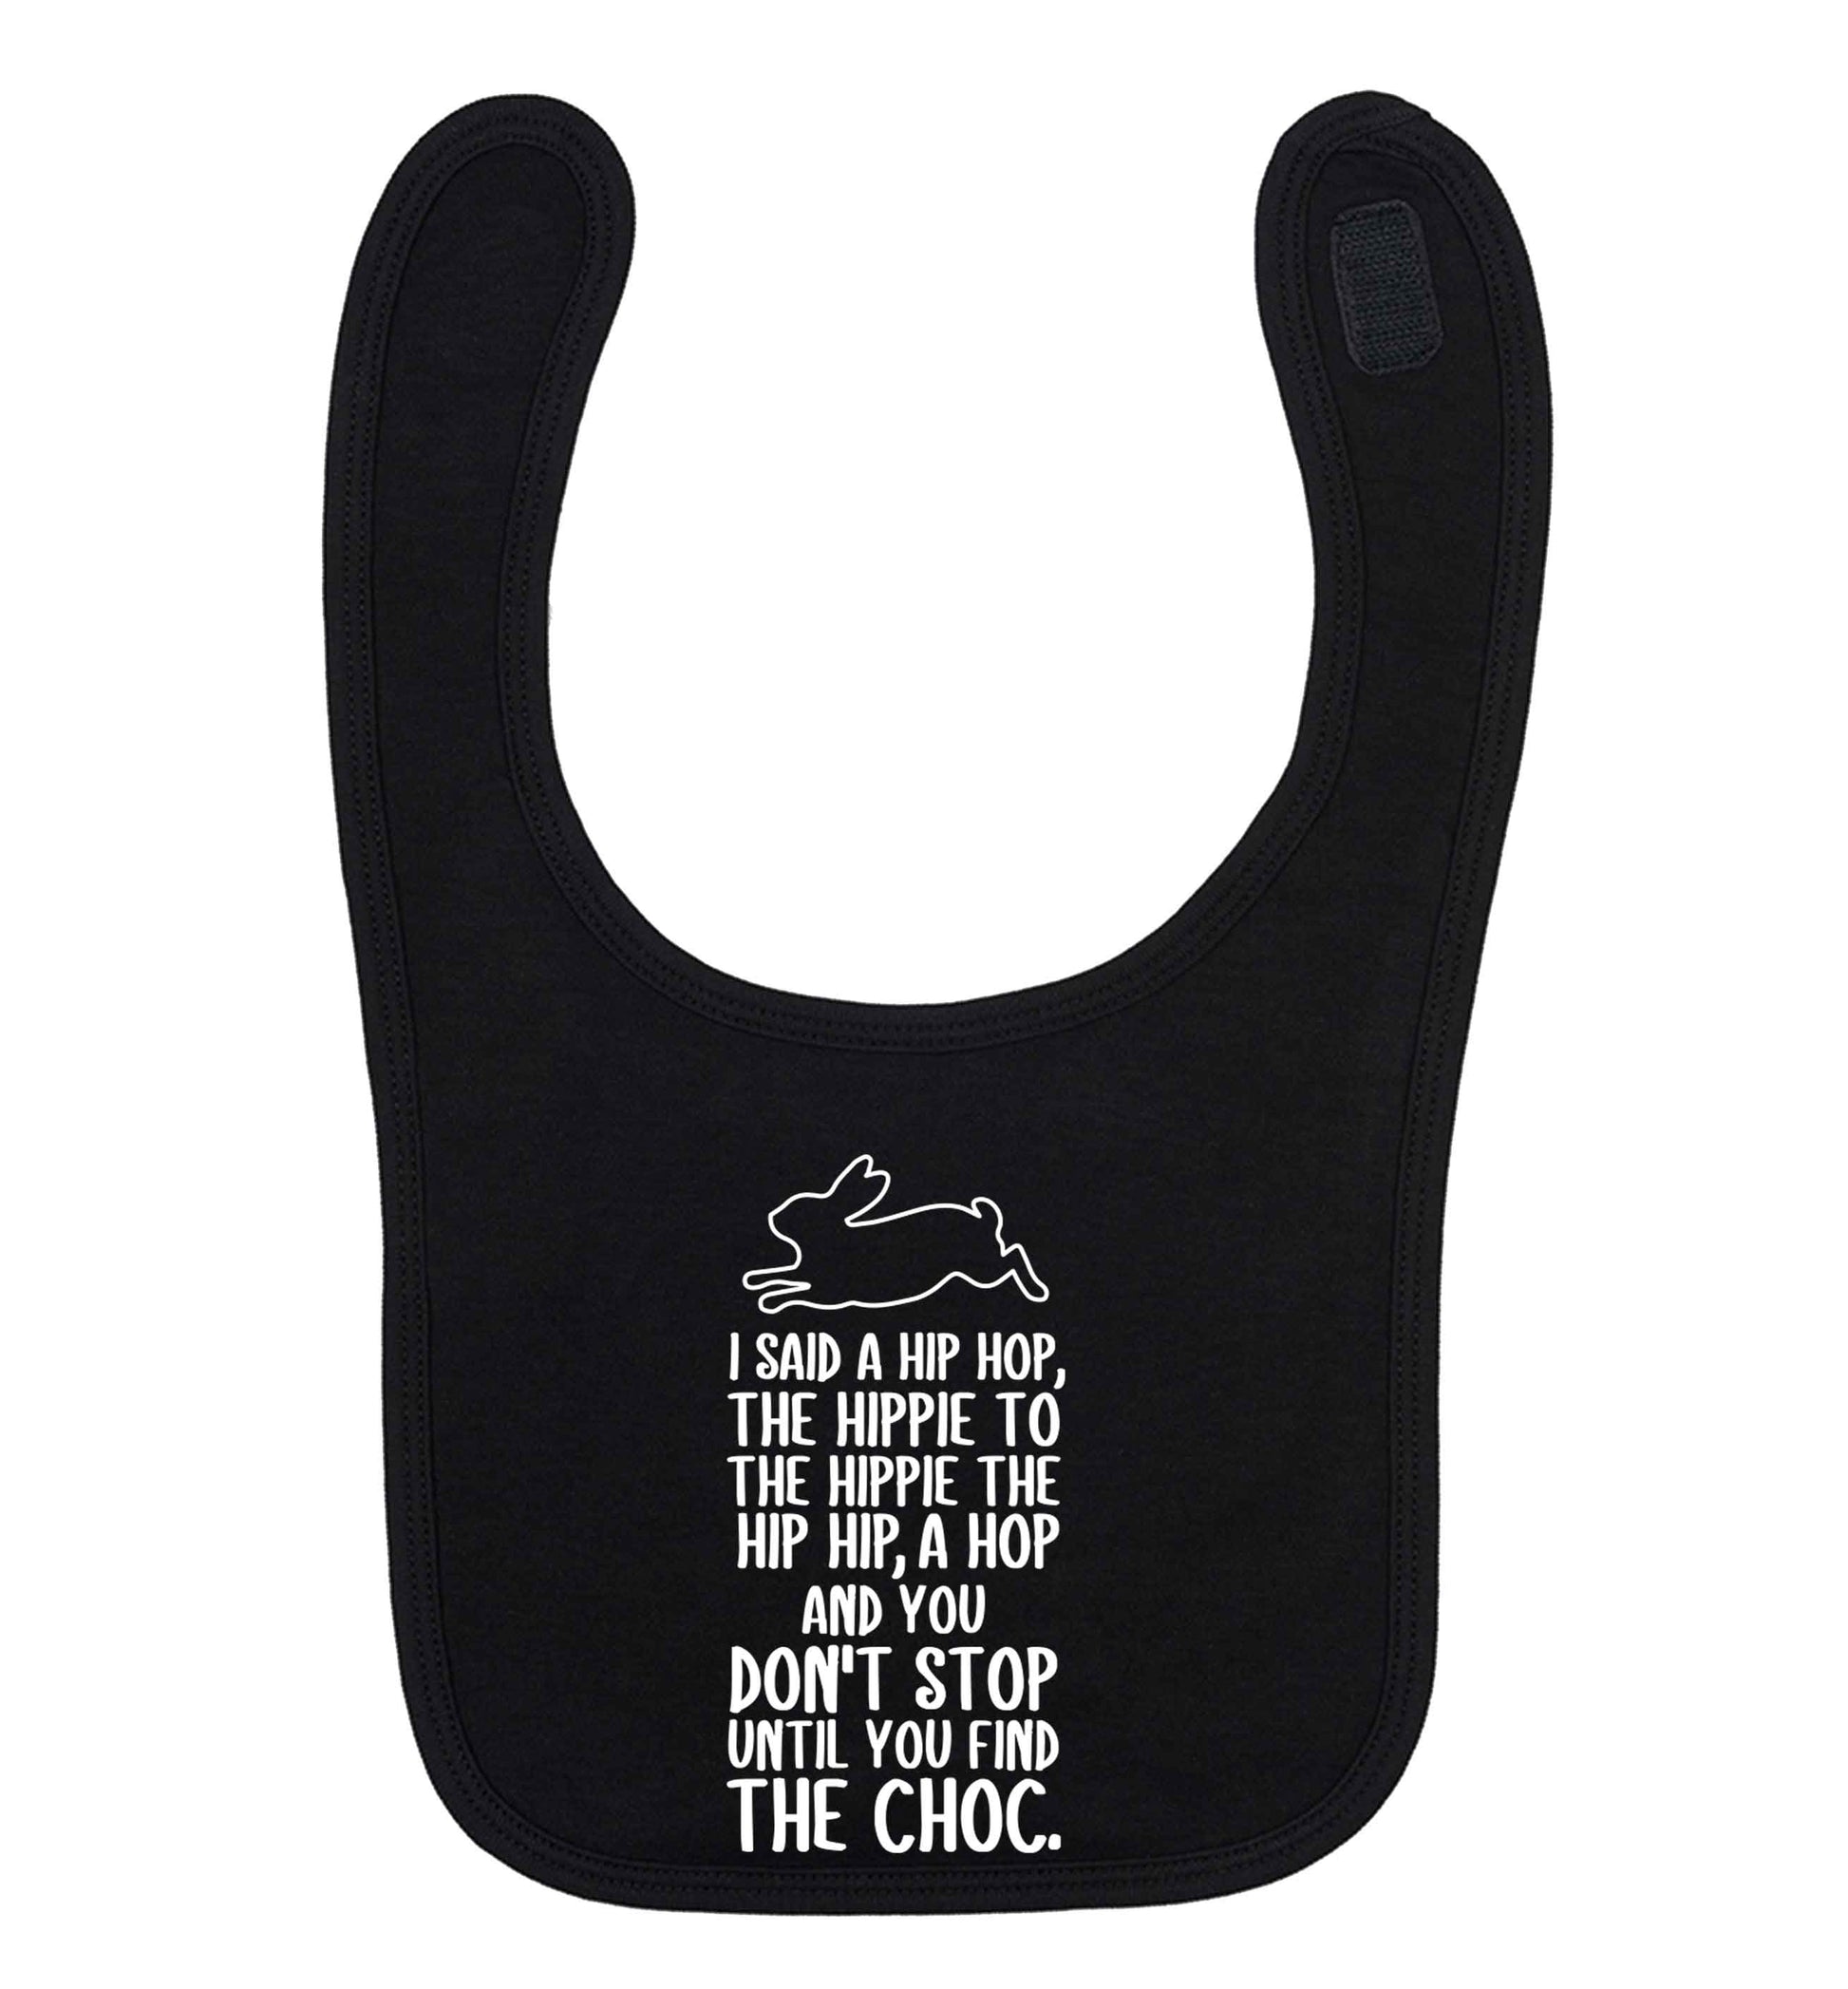 Don't stop until you find the choc black baby bib